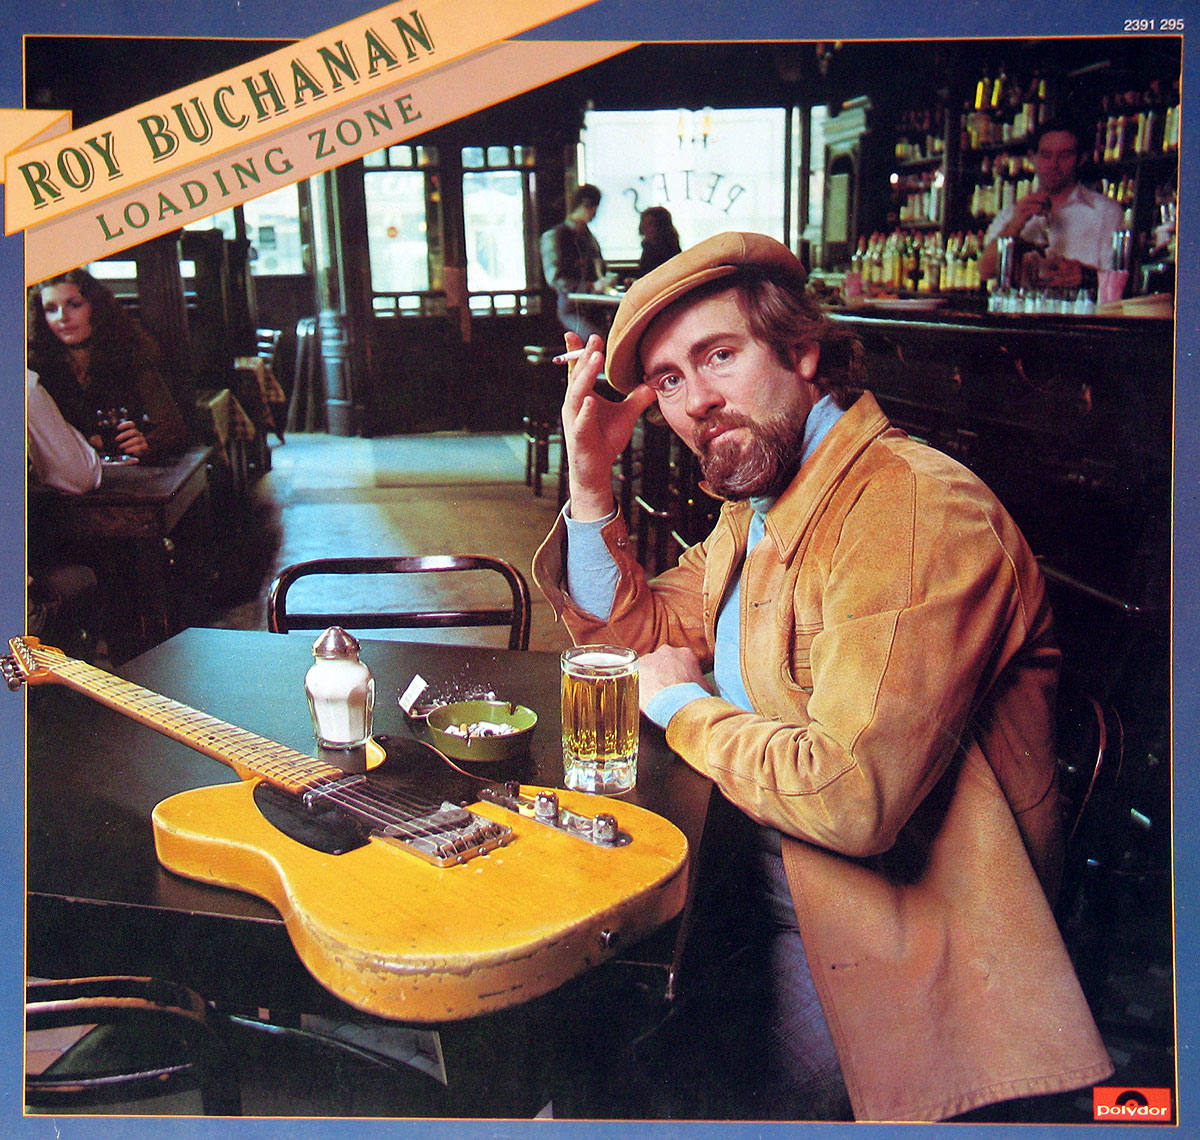 large photo of the album front cover of: Roy Buchanan - Loading Zone 